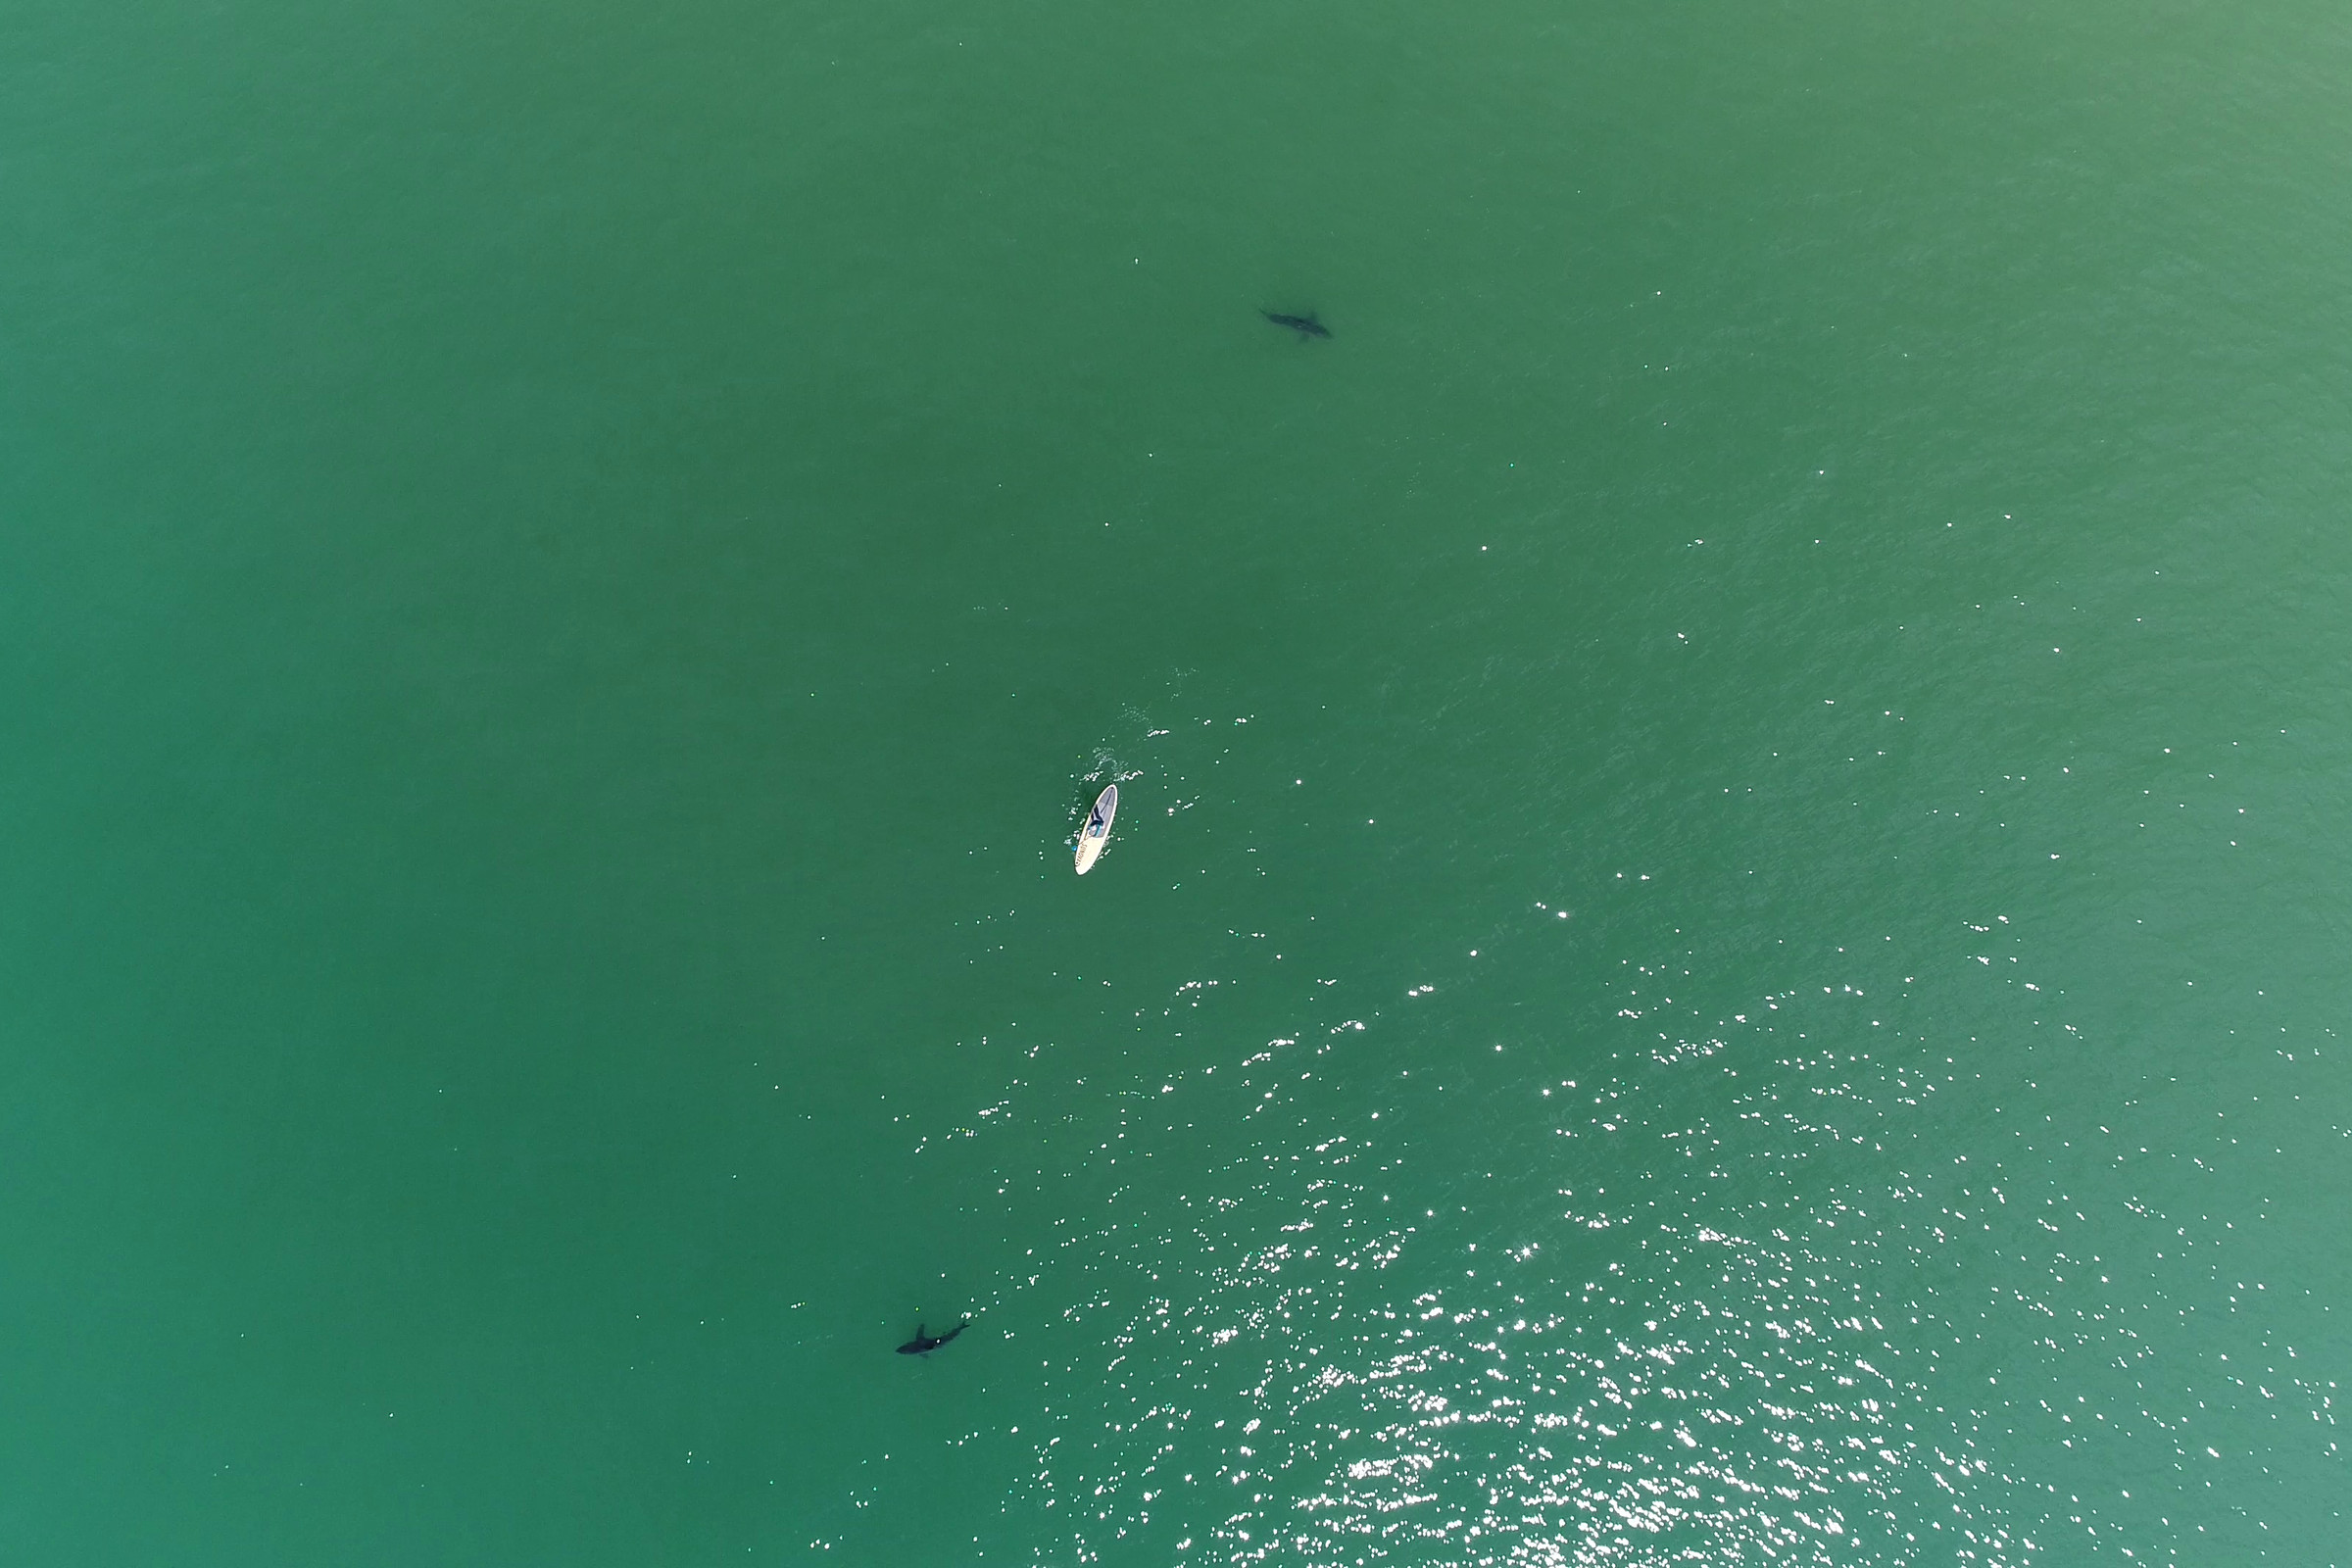 Two sharks and a surfer off the coast of California.